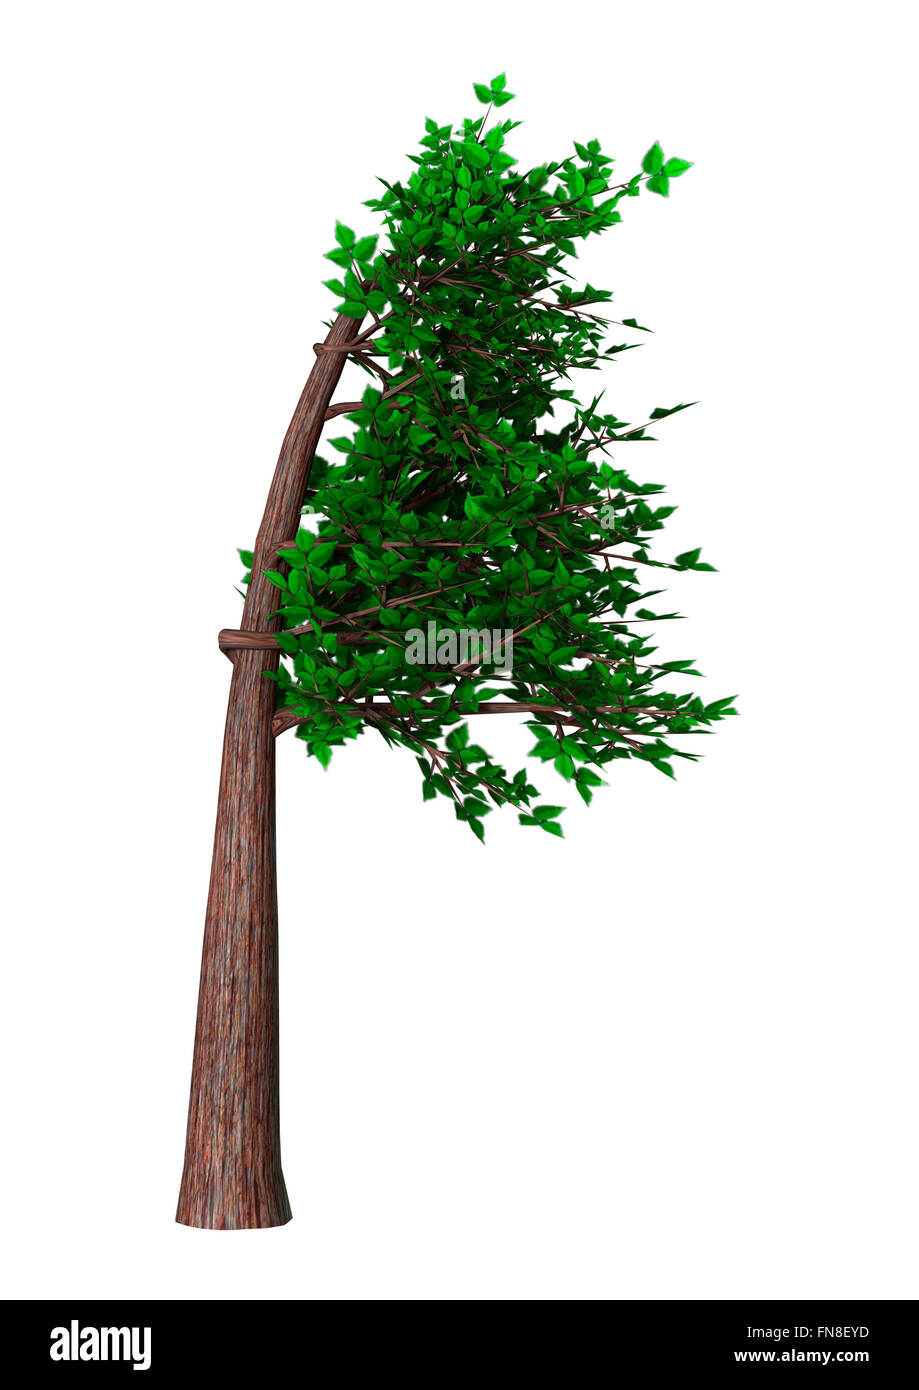 Digital render of a green bonsai tree isolated on white background, Fukinagashi or windblown style Stock Photo